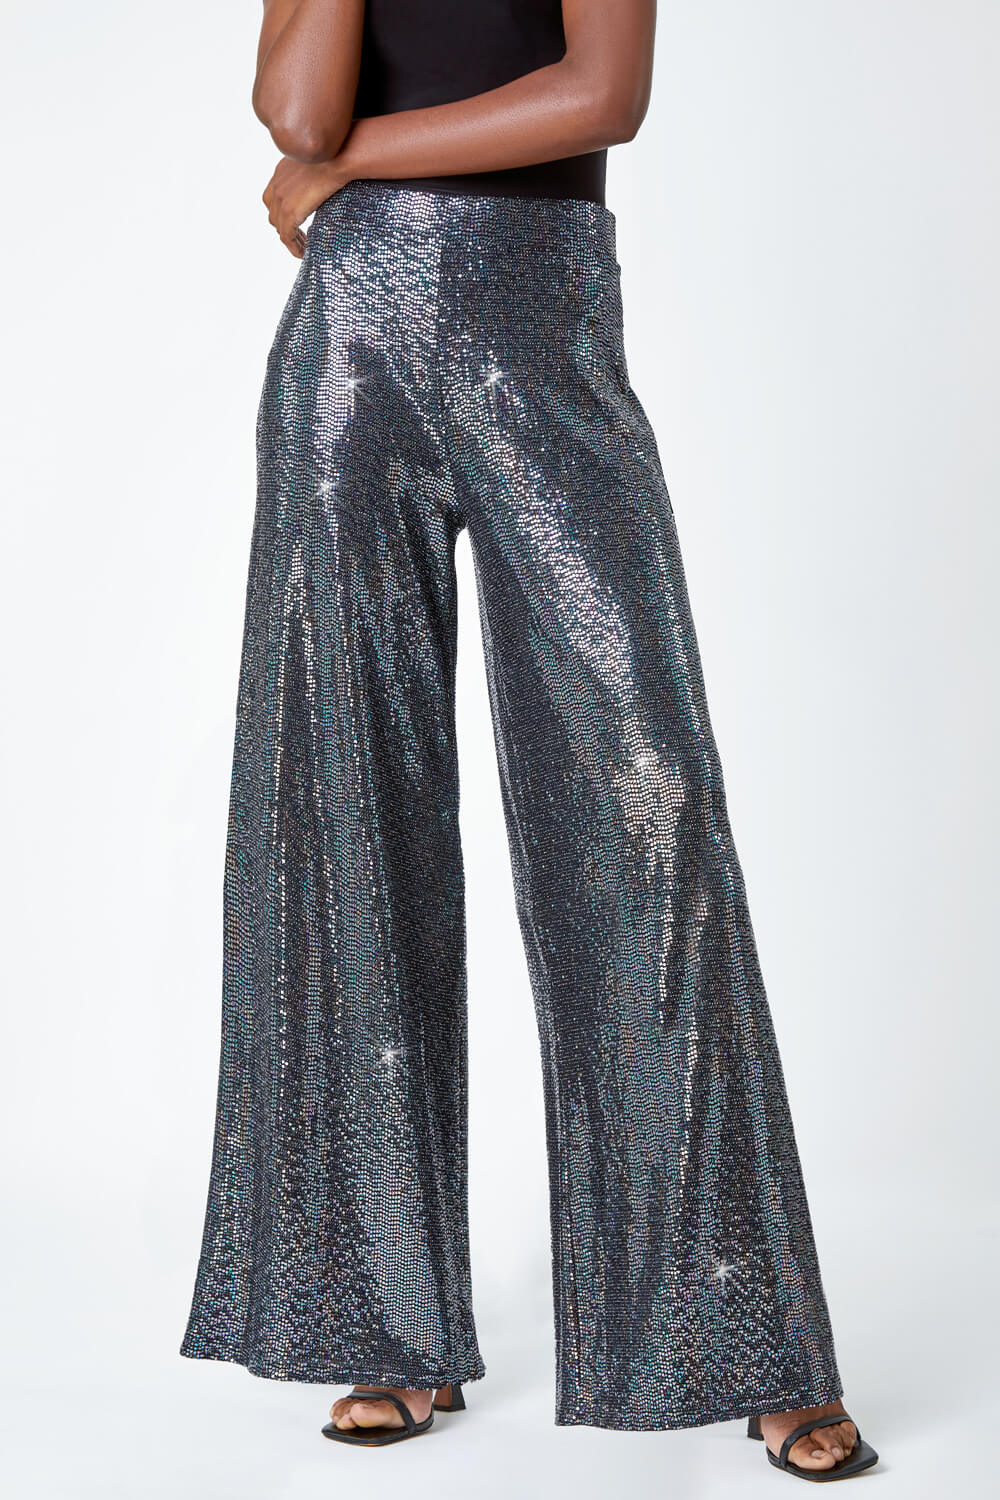 Silver Wide Leg Sequin Stretch Trousers, Image 5 of 7